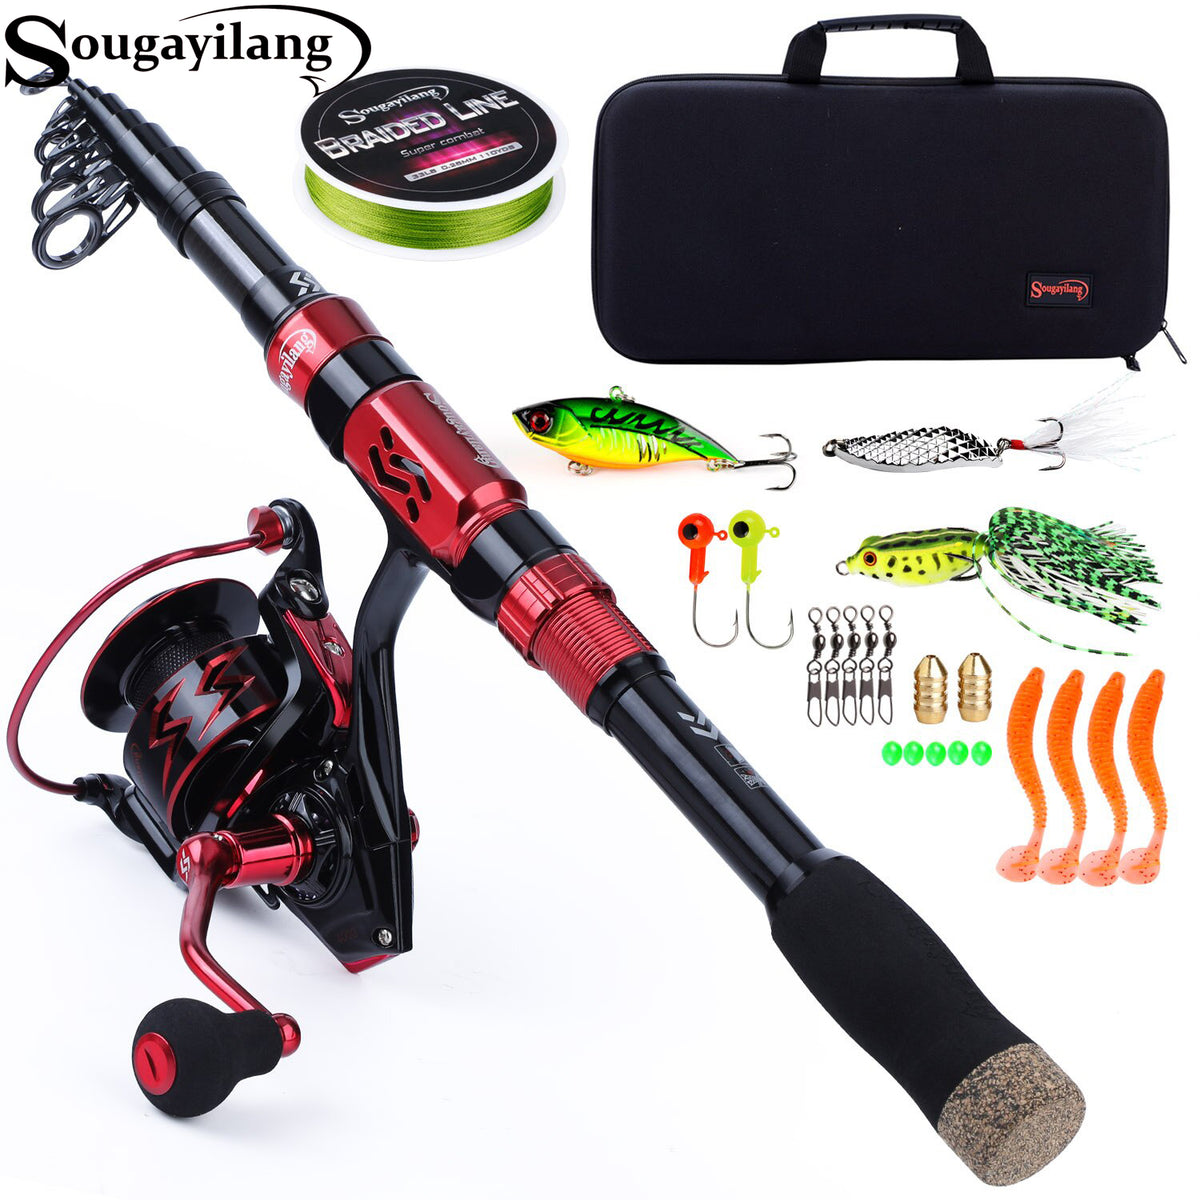 Sougayilang Baitcasting Combo 7.2:1 Gear Ratio Knuckle Carbon Rod with  Comfortable Grip for Freshwater Fishing